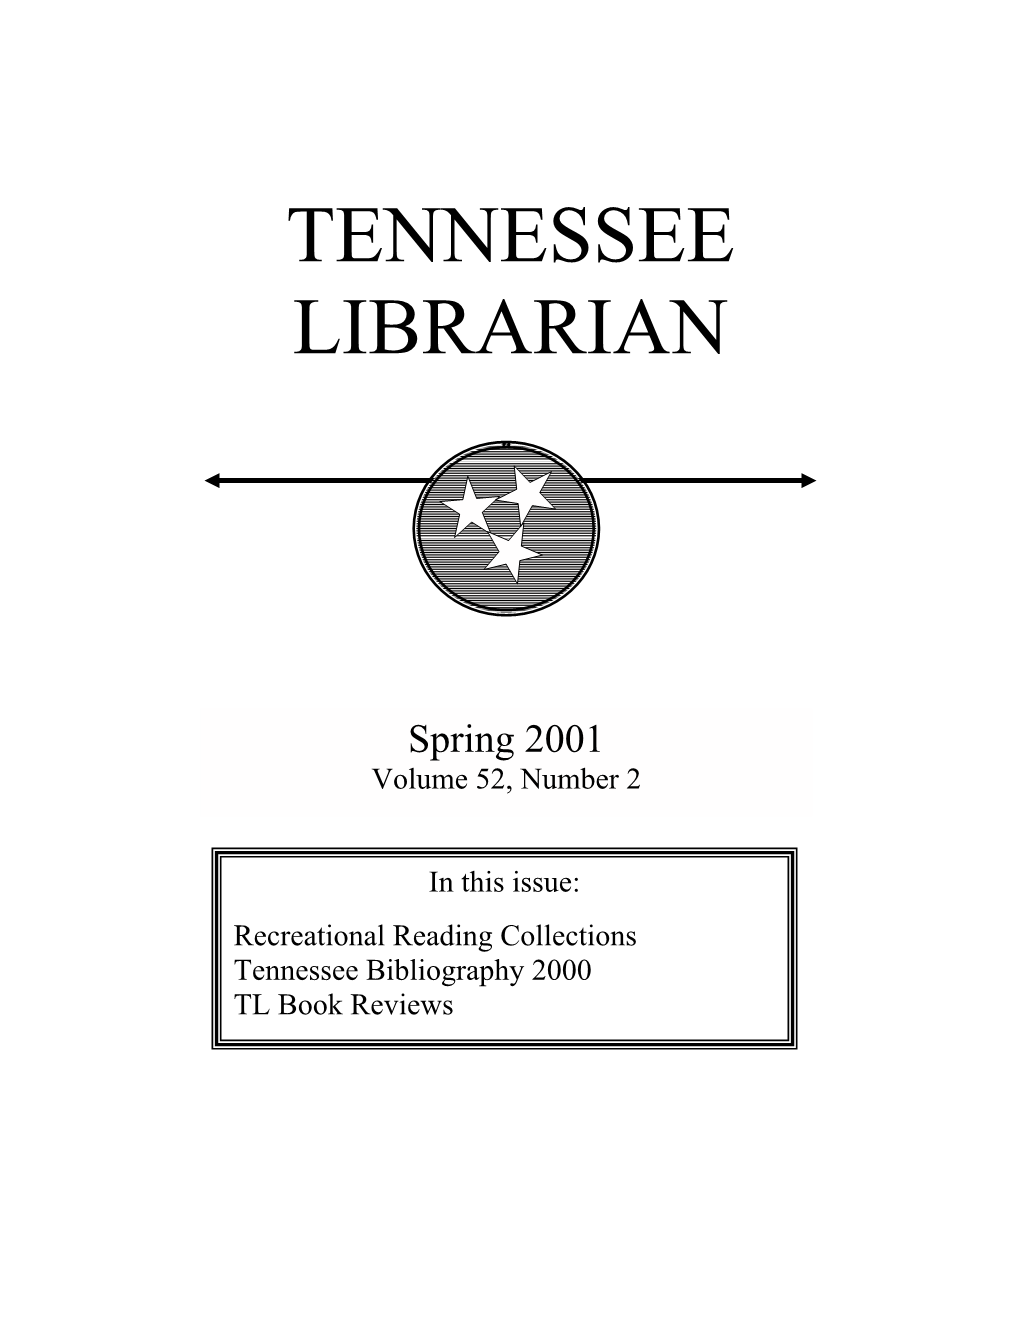 Tennessee Librarian 52(2) Spring 2001 1